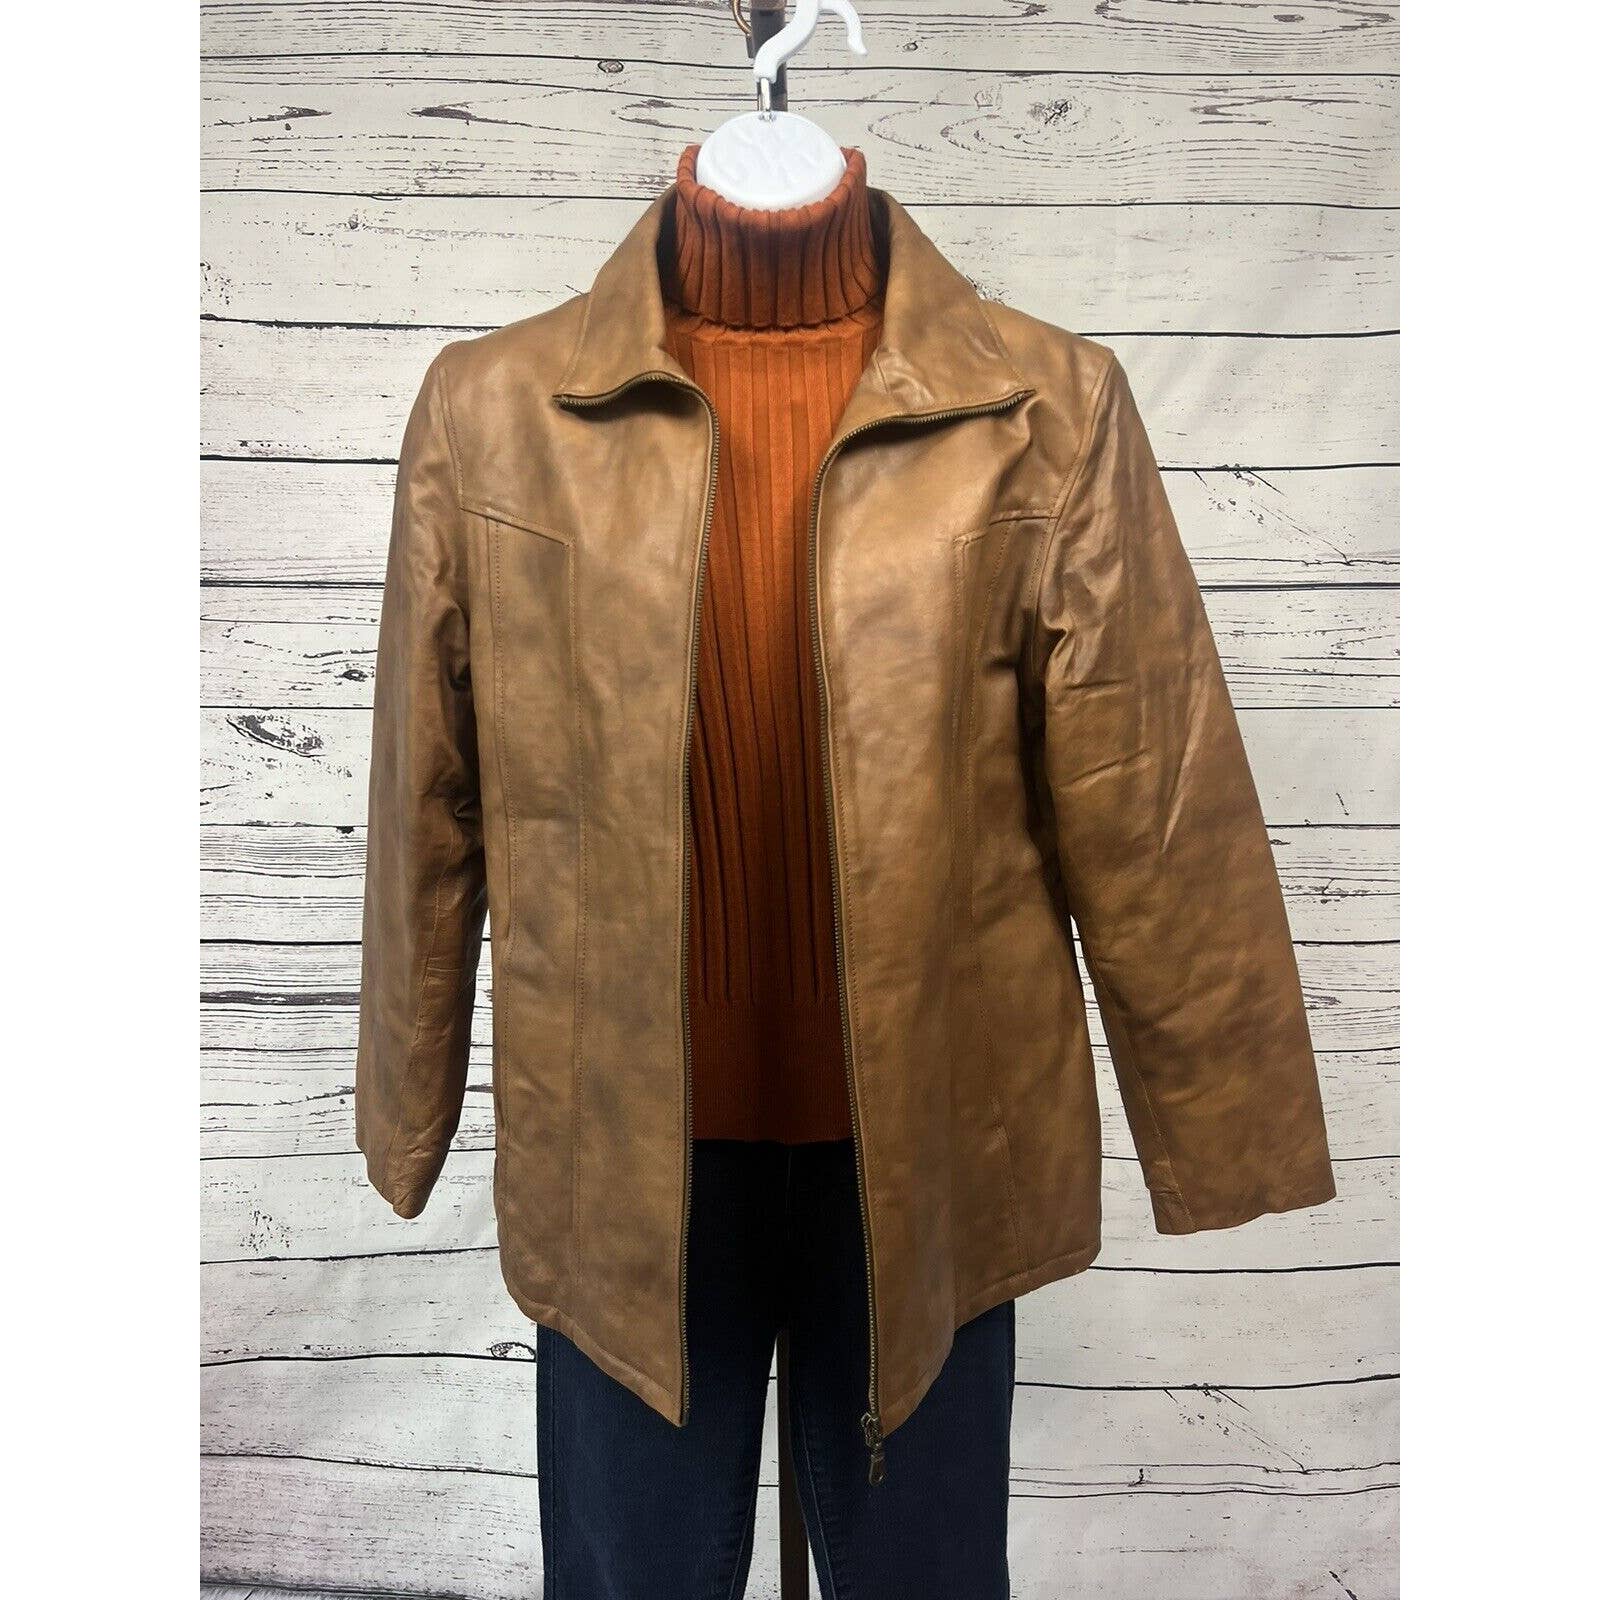 KC Collections Leather Jacket Women’s Small Distressed Caramel Brown Full Zip